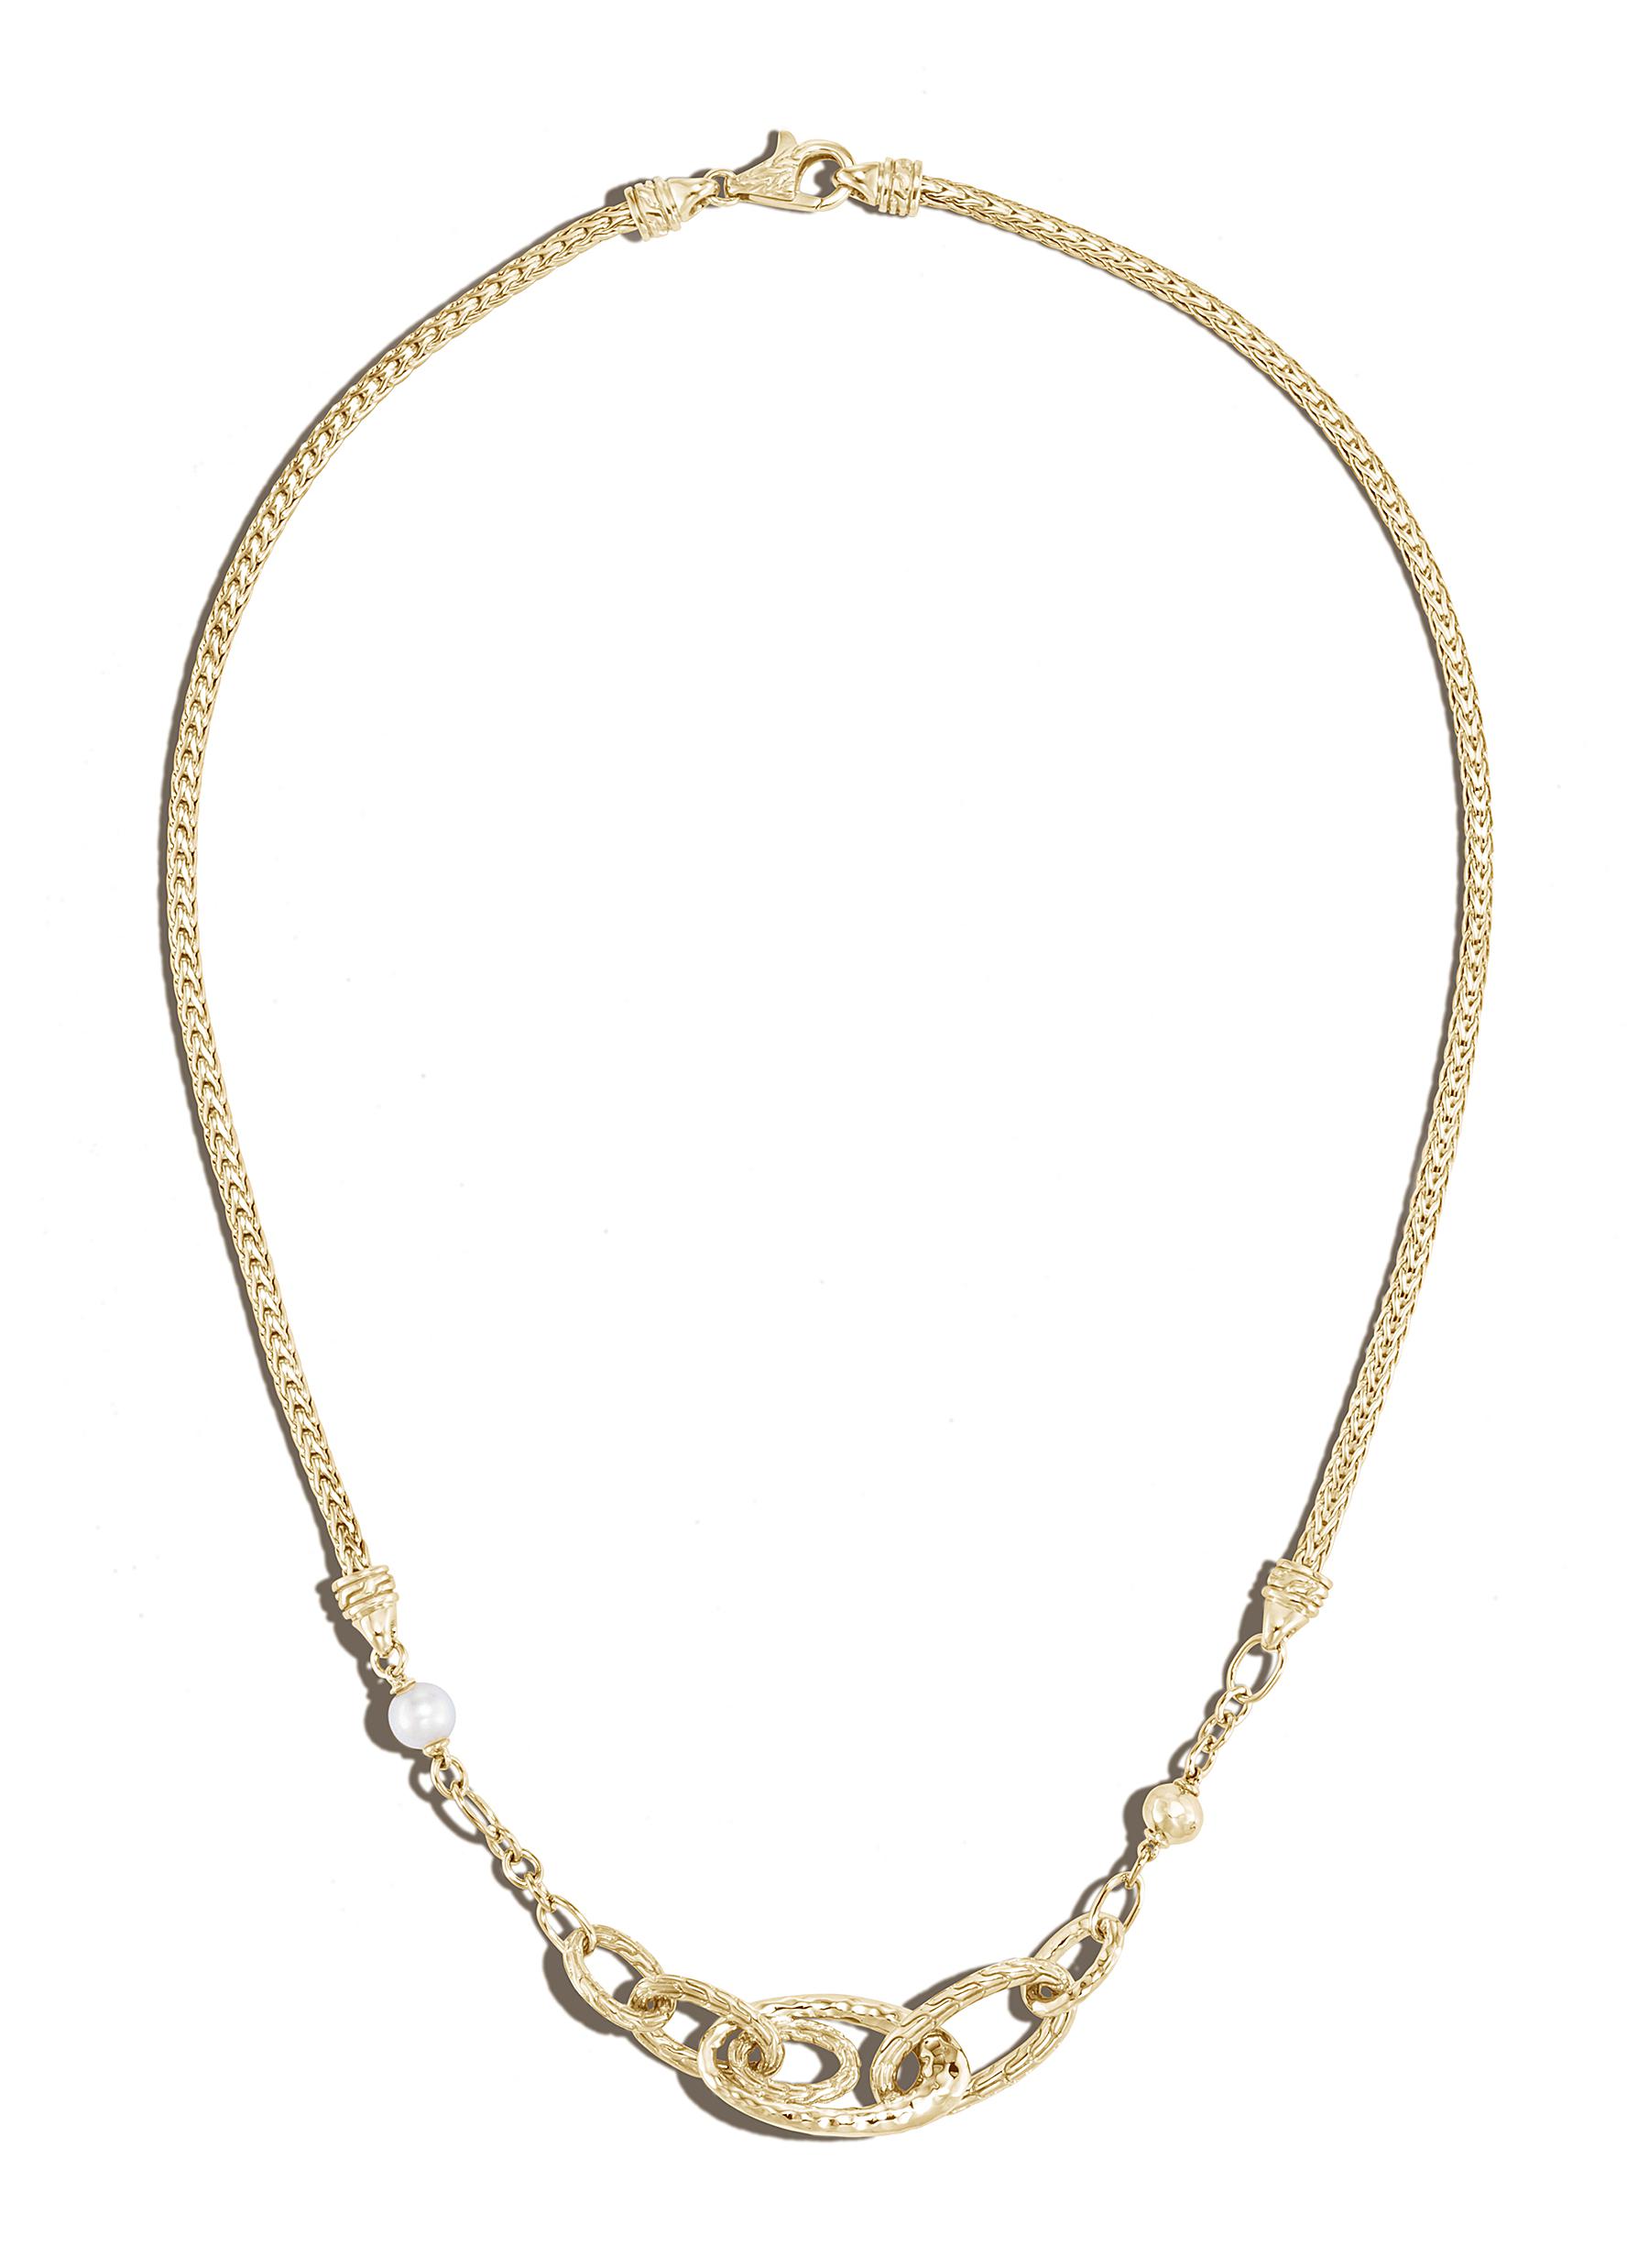 'Classic Chain' Freshwater Pearl Palu 18k Gold Necklace